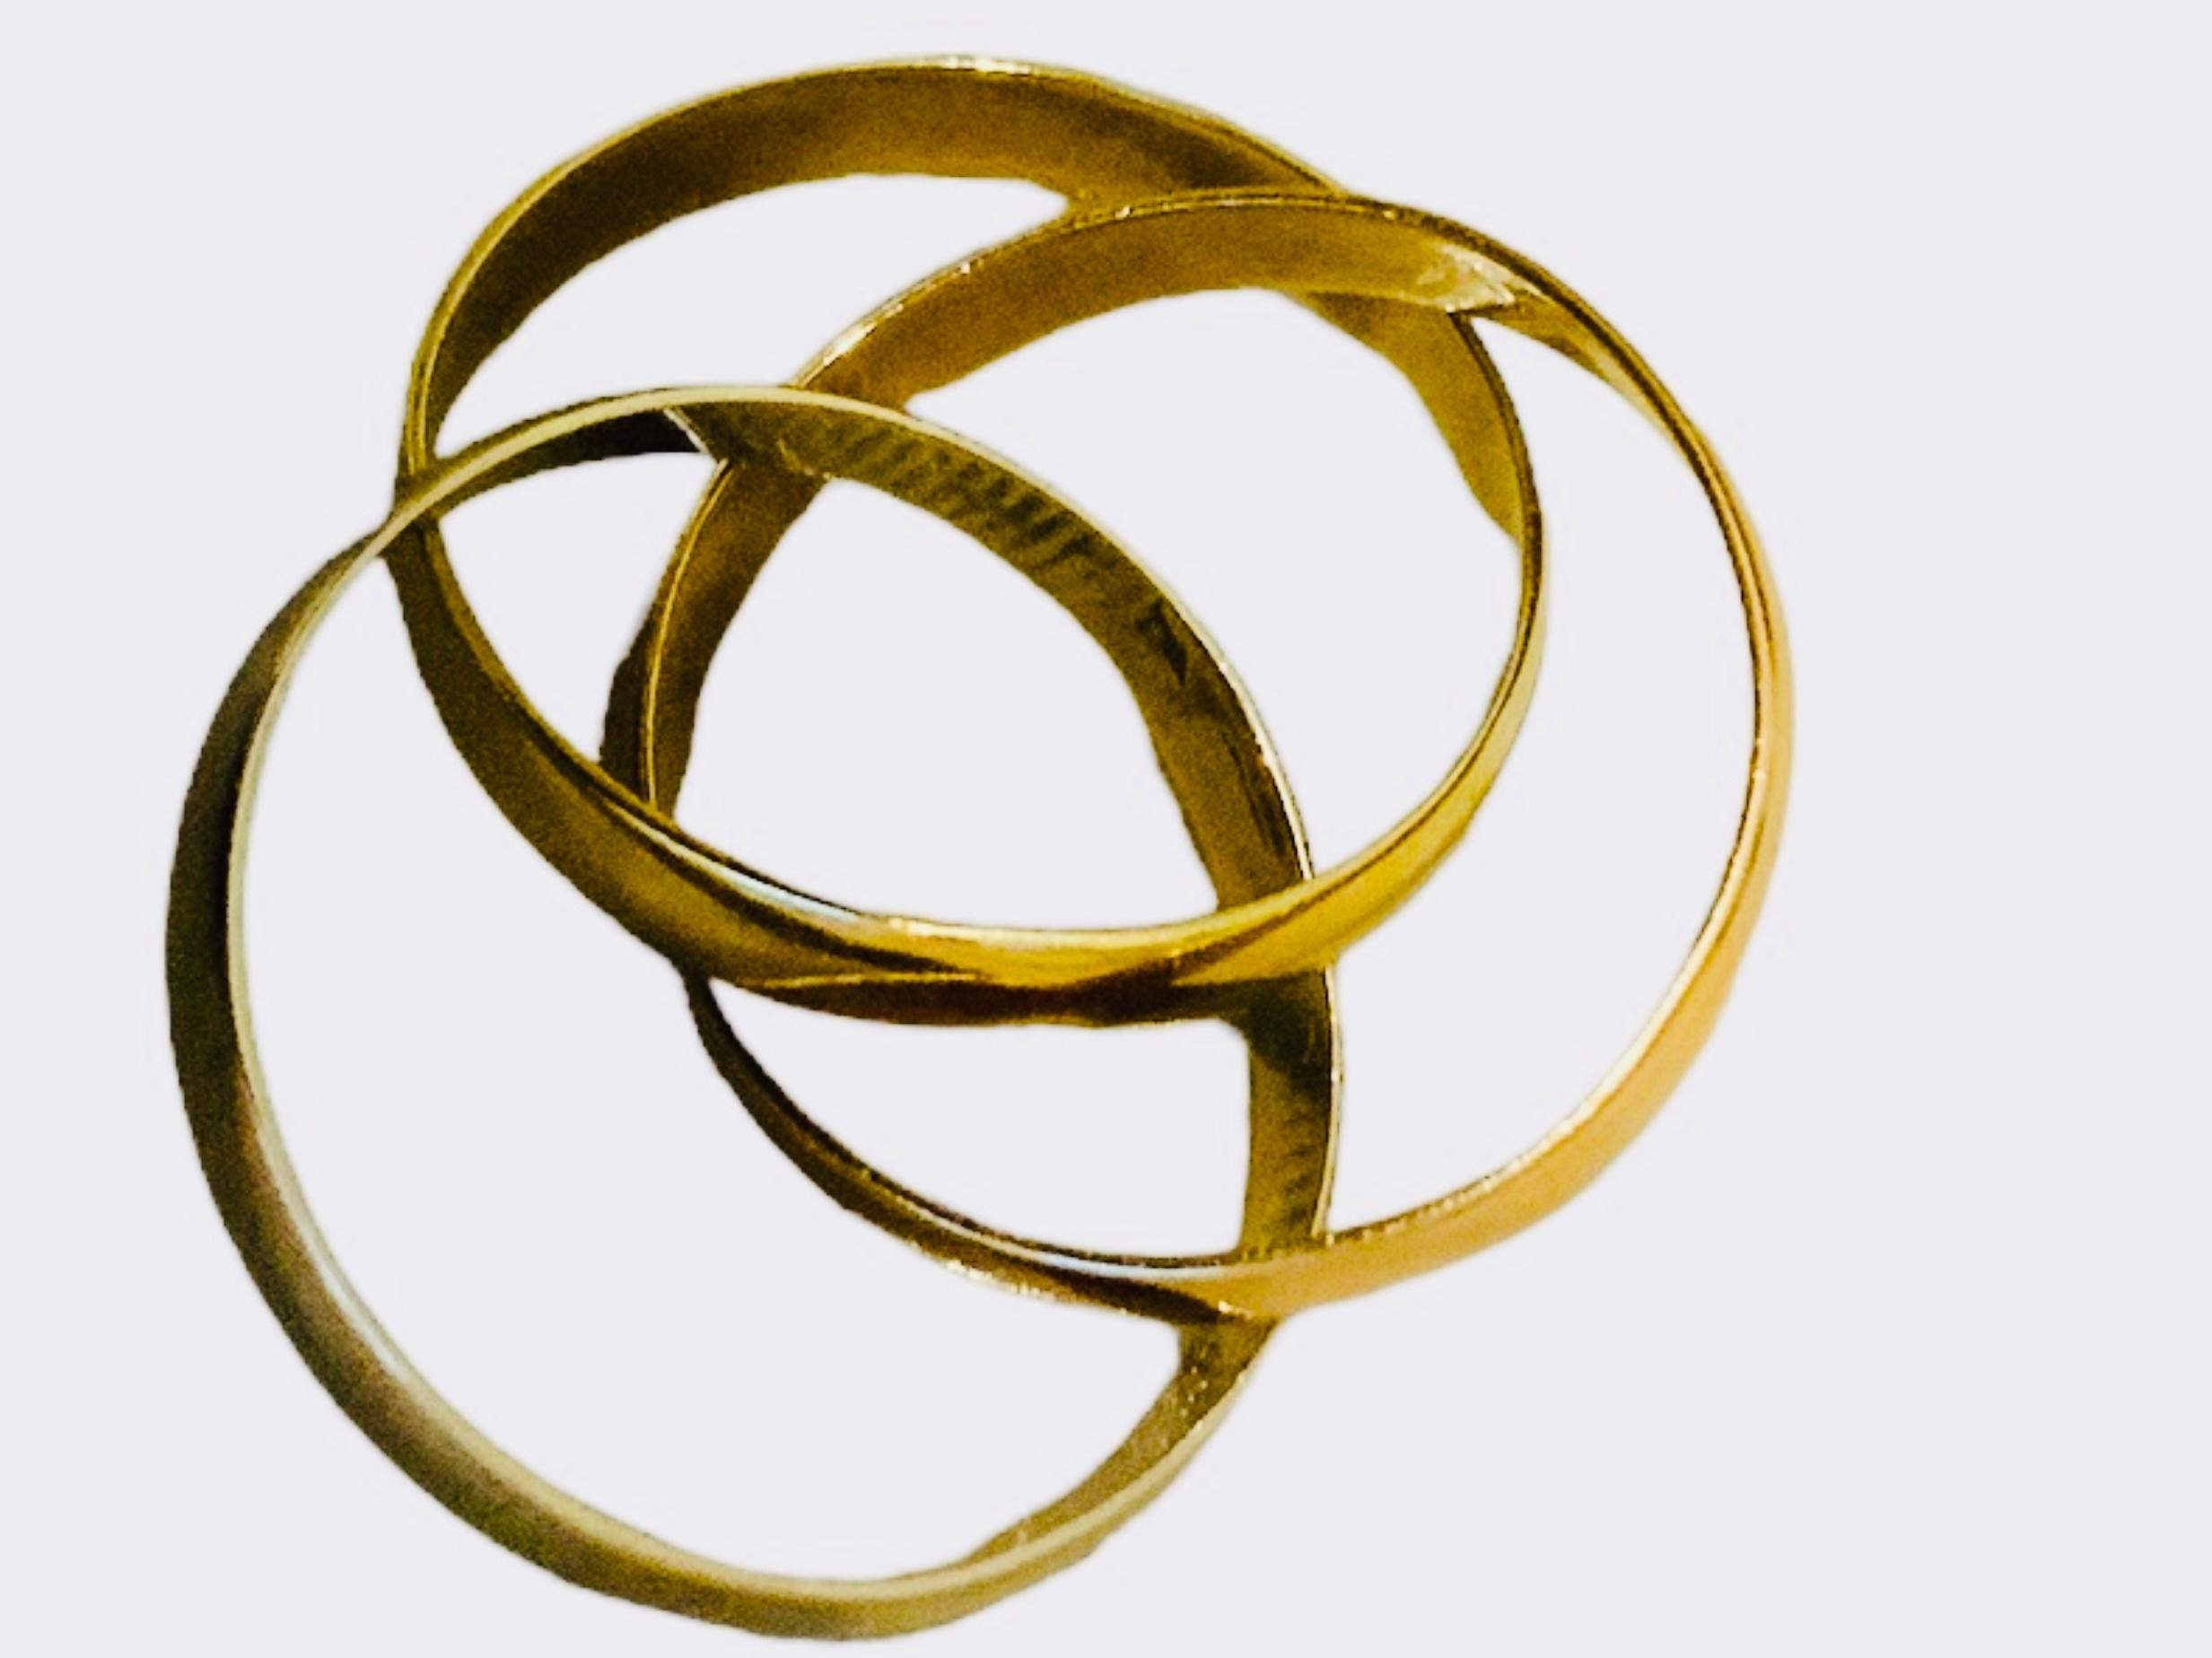 This is a set of three 14K gold thin bands. It depicts three round shaped bands with different shades of gold (yellow, white and rose ) entwined together. They symbolize the Holy Trinity- The Father, Son and Holy Spirit.